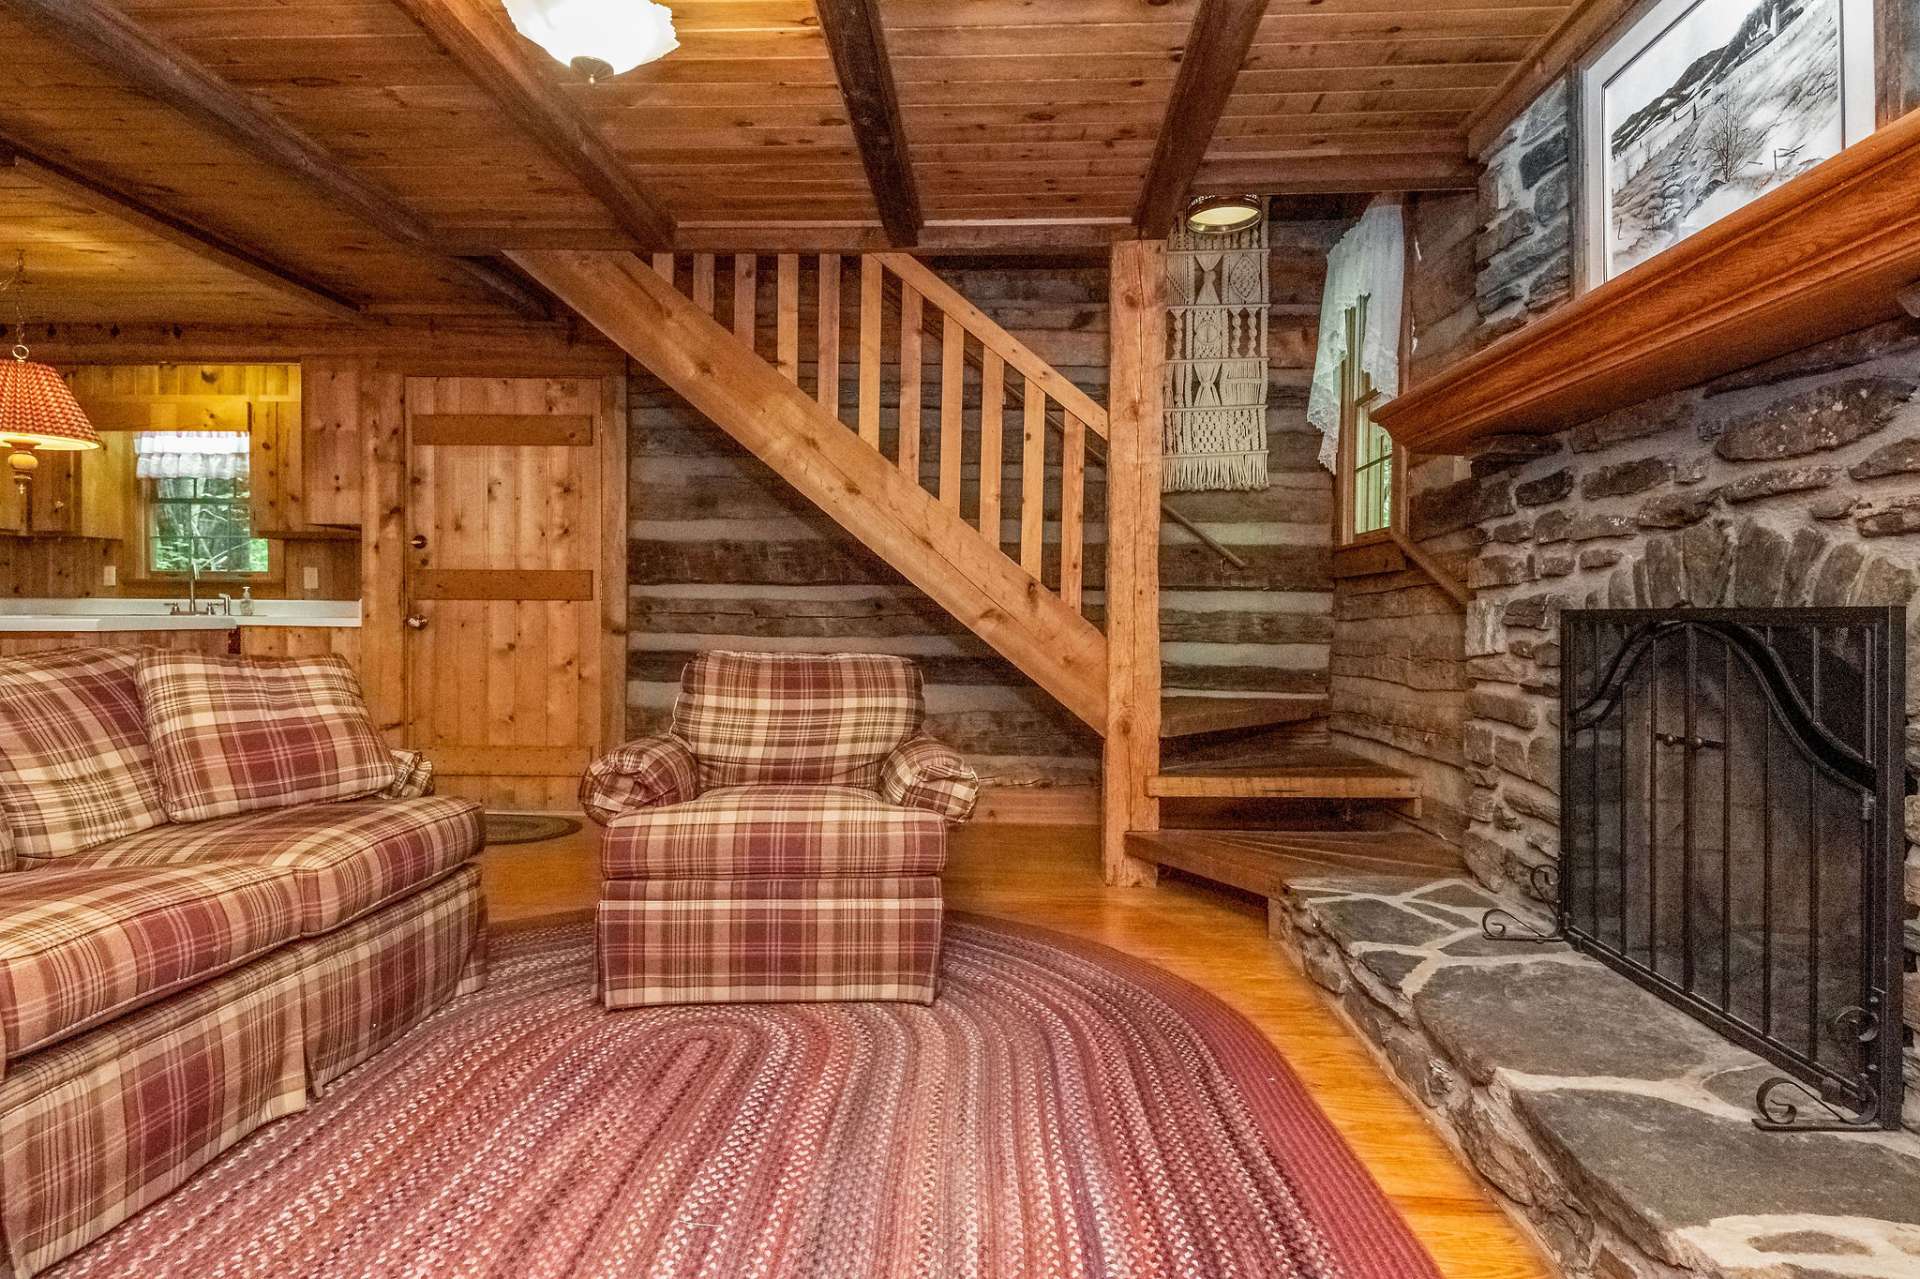 The main level great room offers spacious area to spread out and be together in your own mountain home.